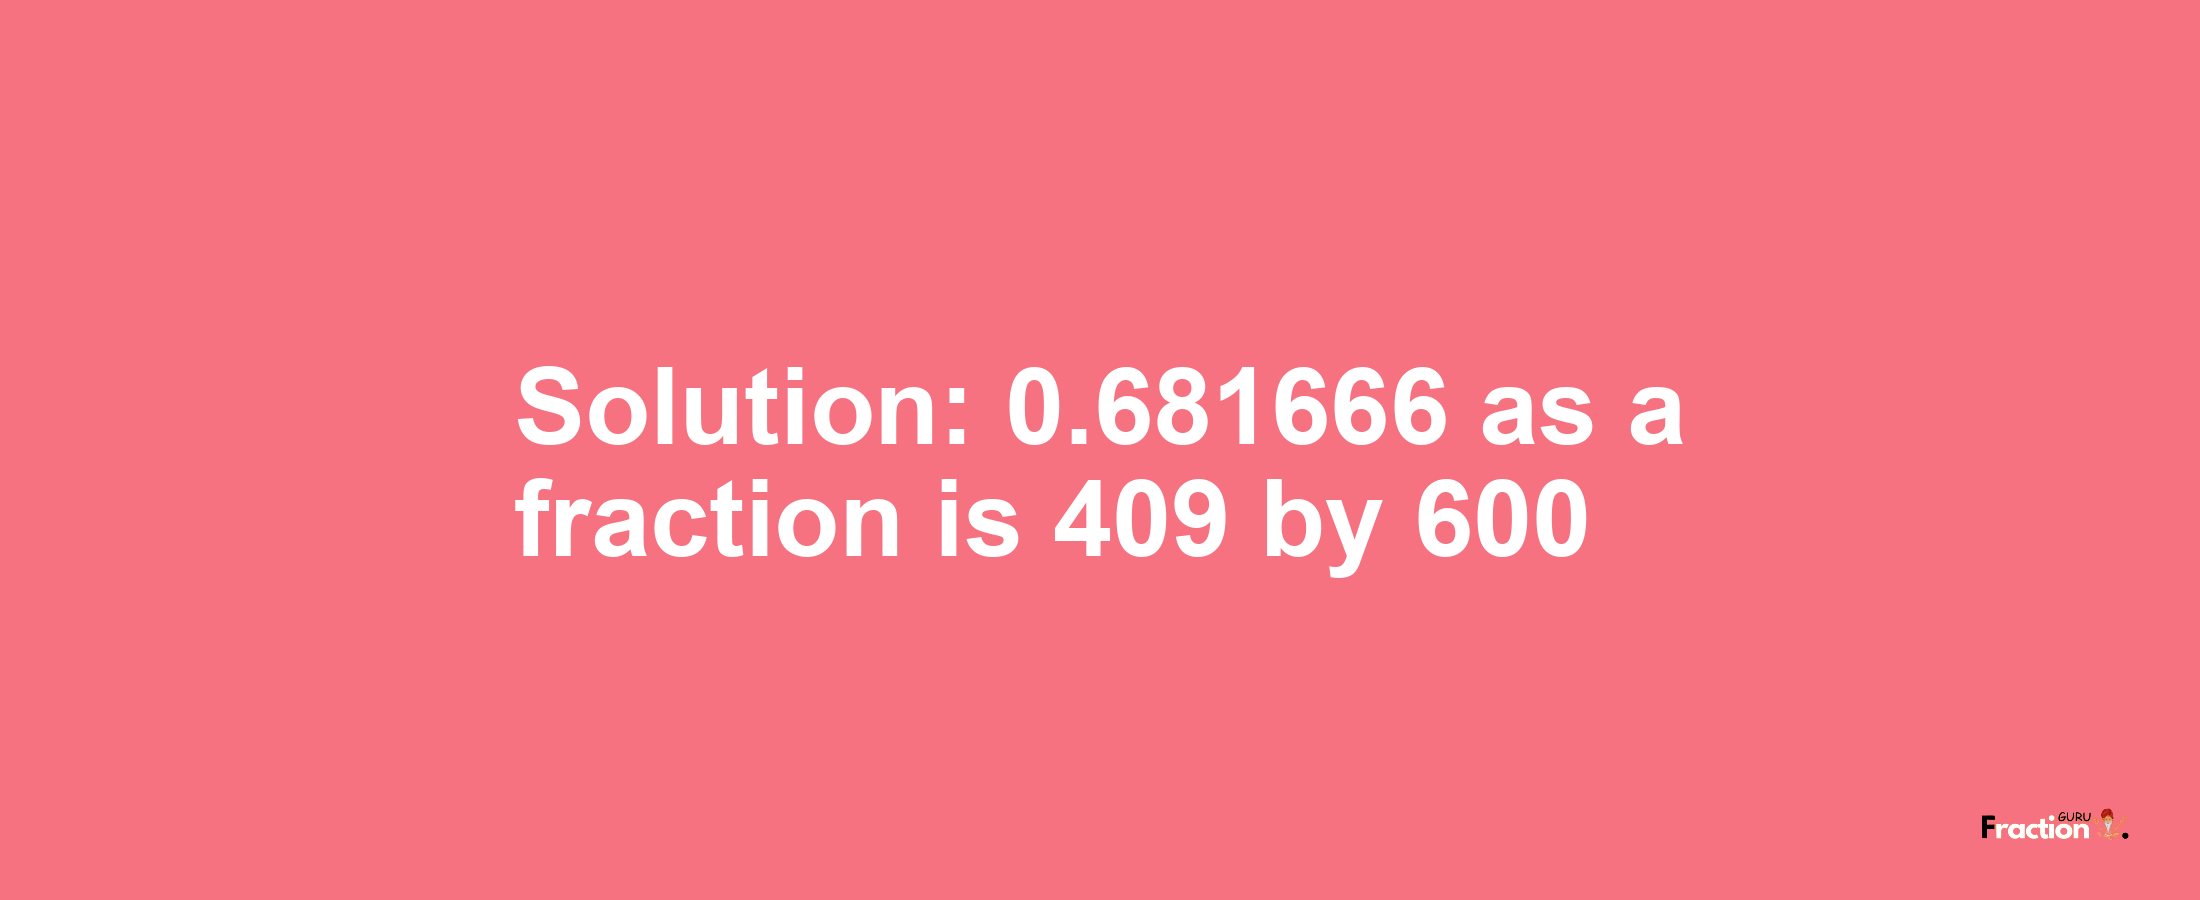 Solution:0.681666 as a fraction is 409/600